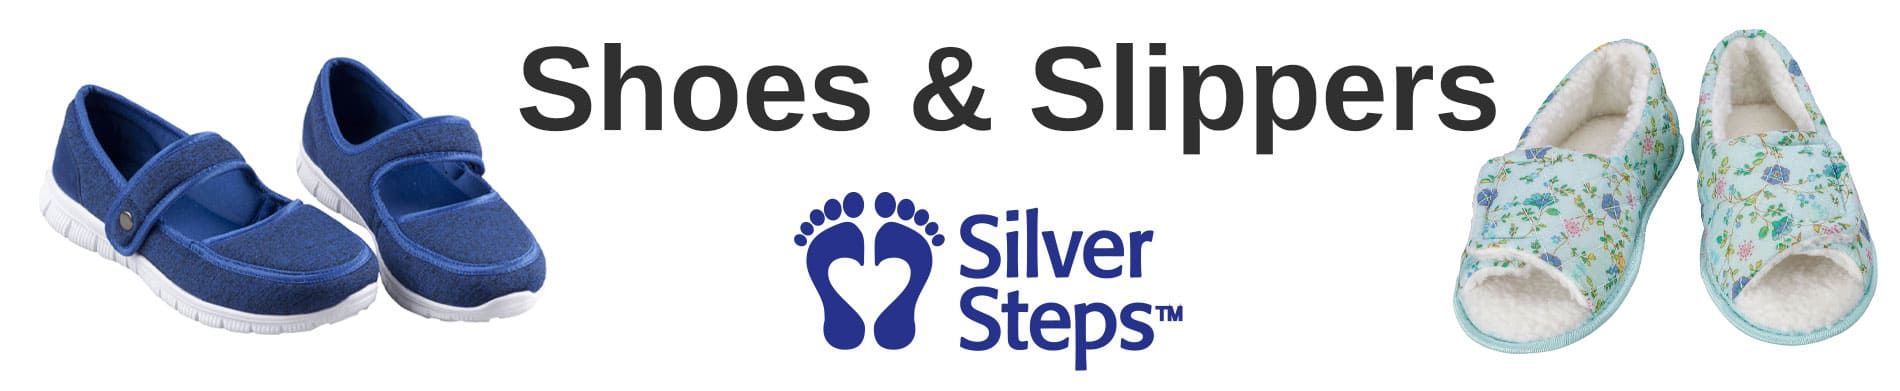 Shoes & Slippers by Silver Steps